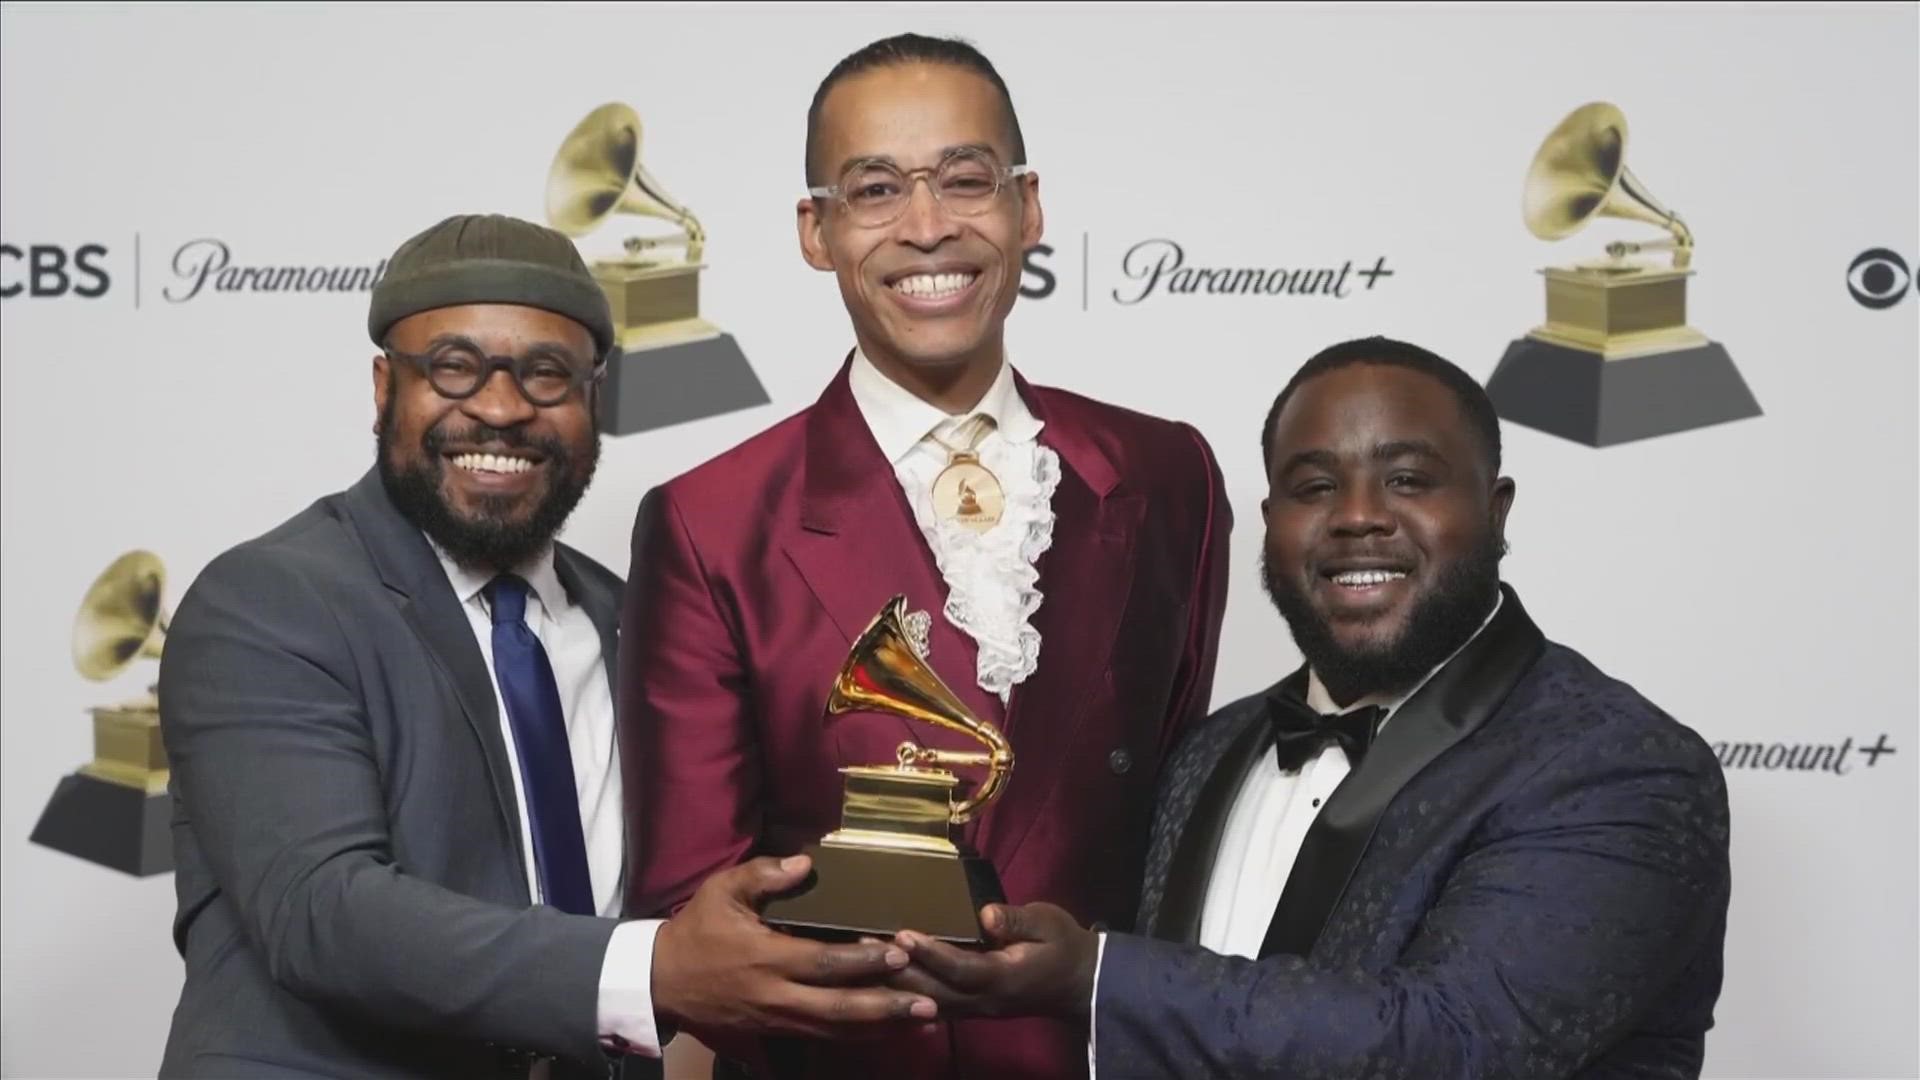 TSU's marching band won two Grammy Awards, one for their gospel album “The Urban Hymnal” and another for their feature on J. Ivy's “The Poet Who Sat By The Door."